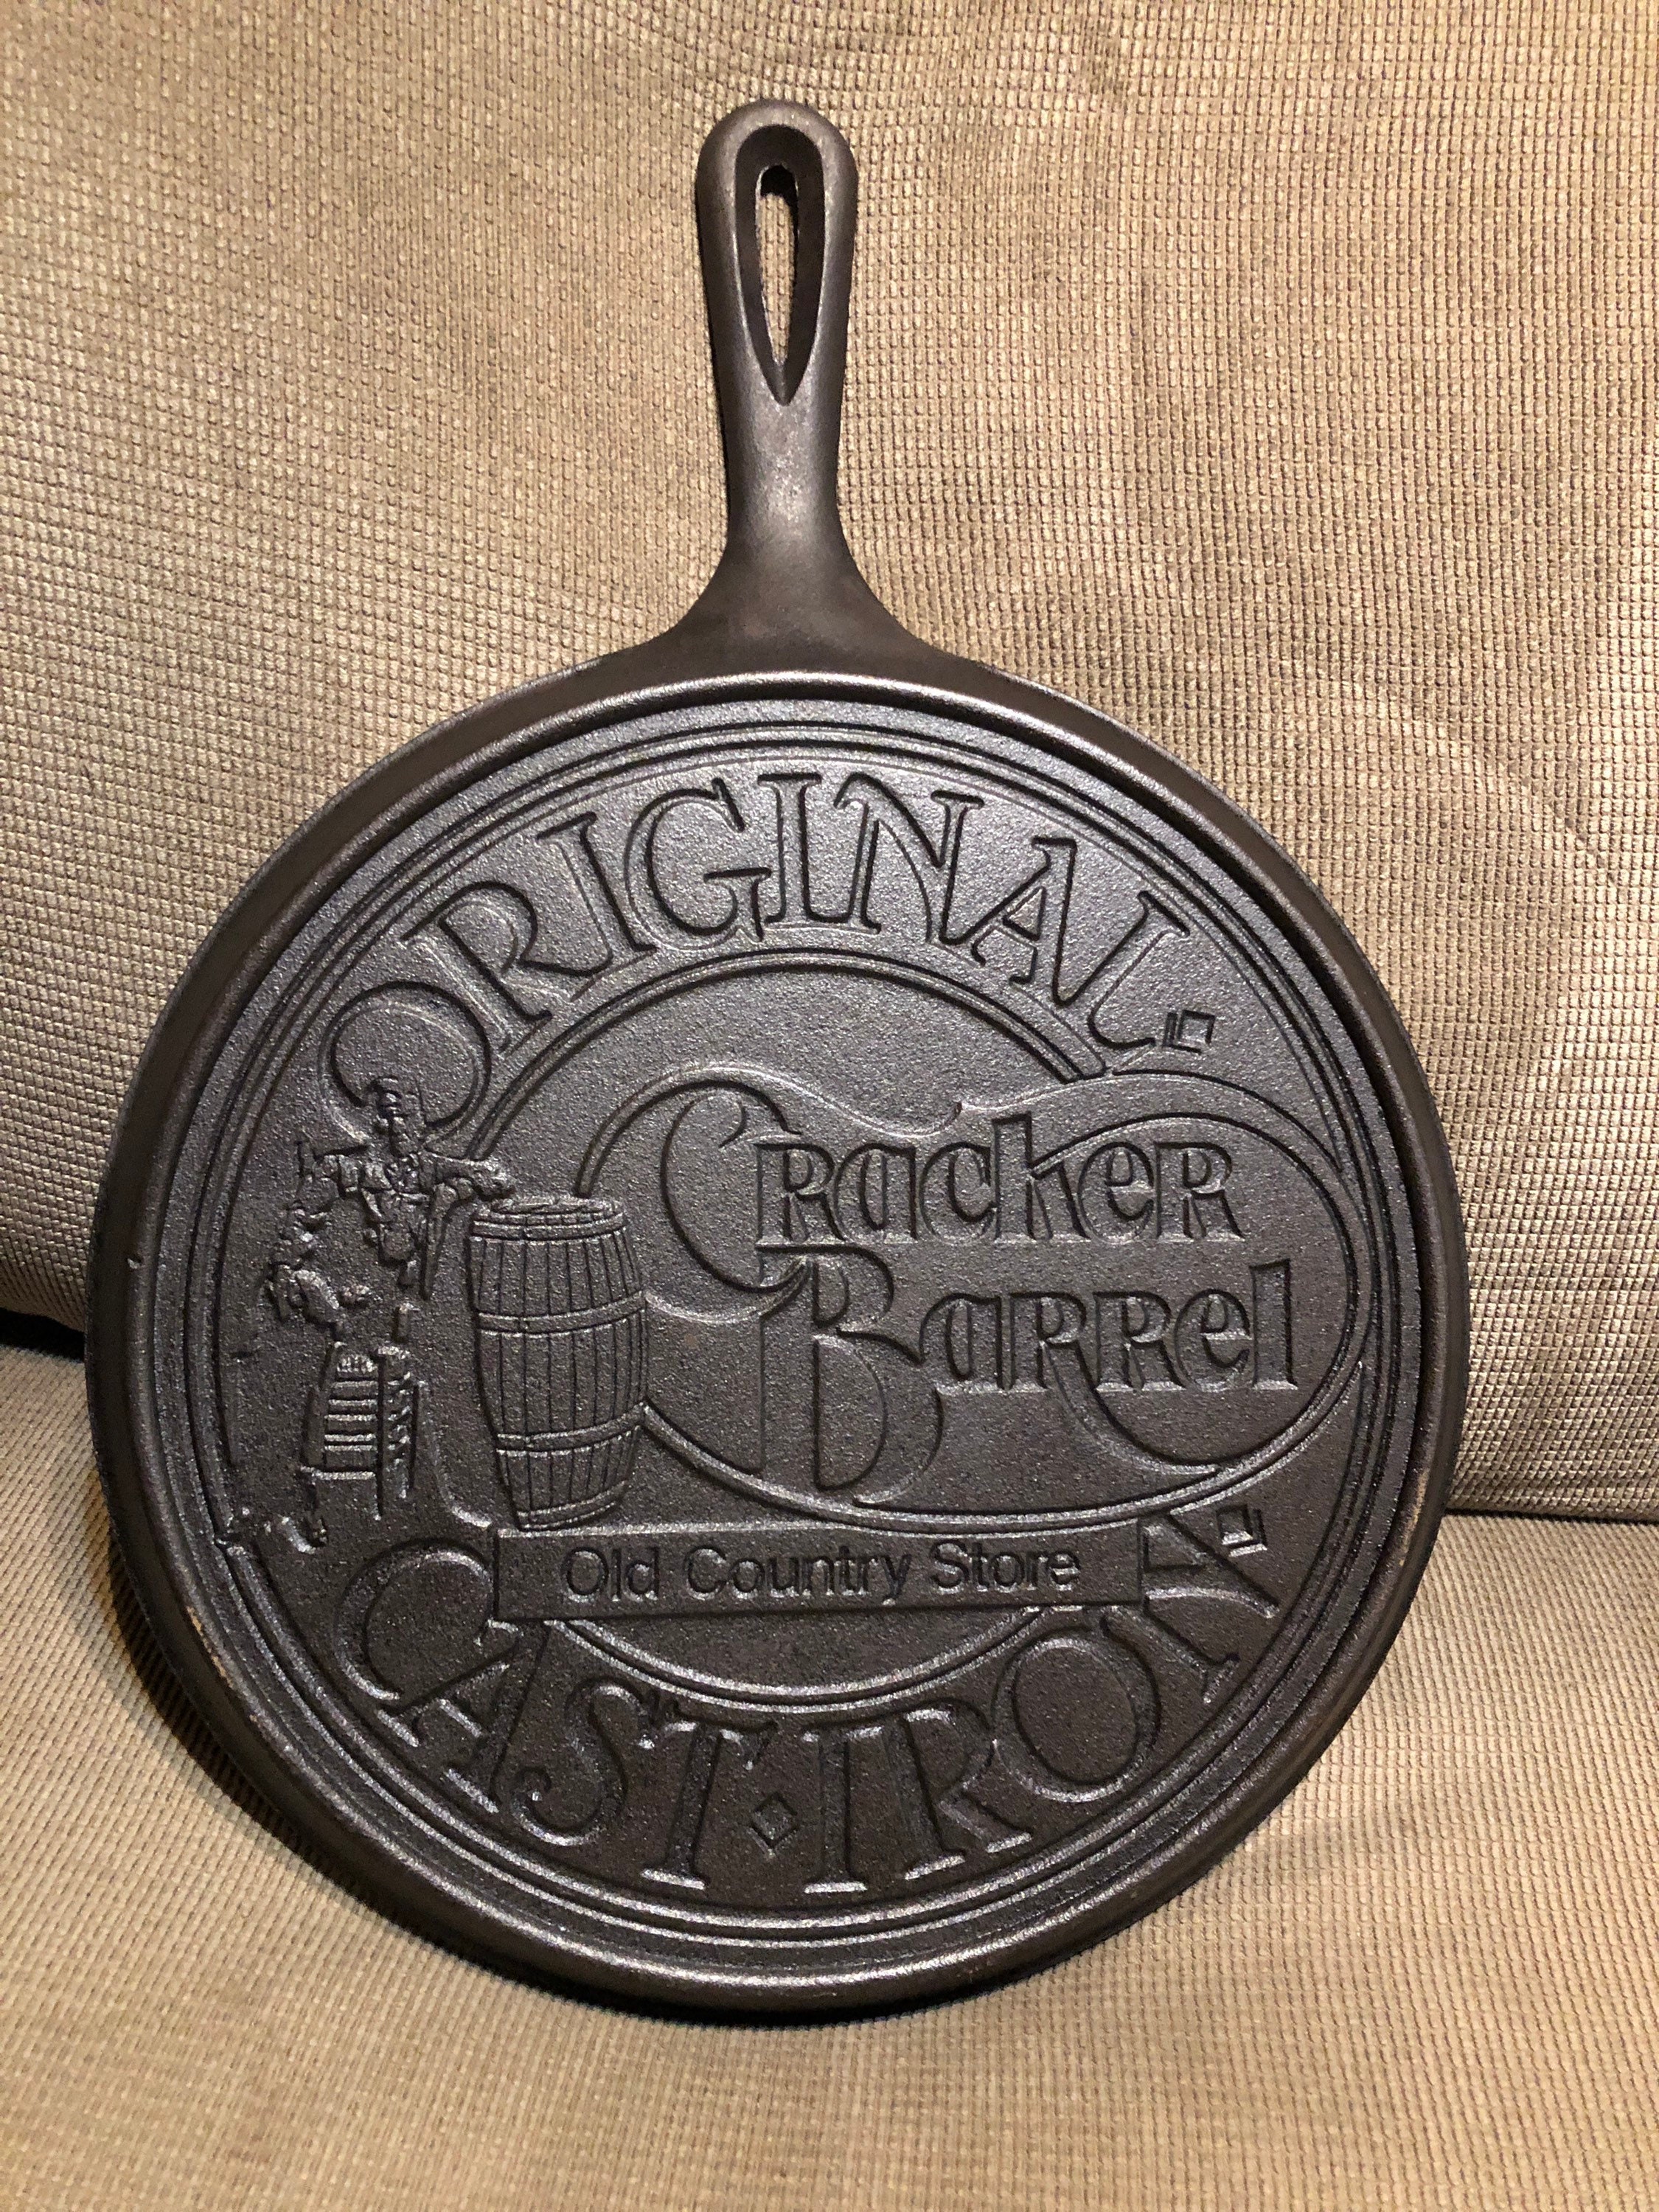 Cracker Barrel Cast Iron Biscuit/ Muffin Pan for 7 Biscuits